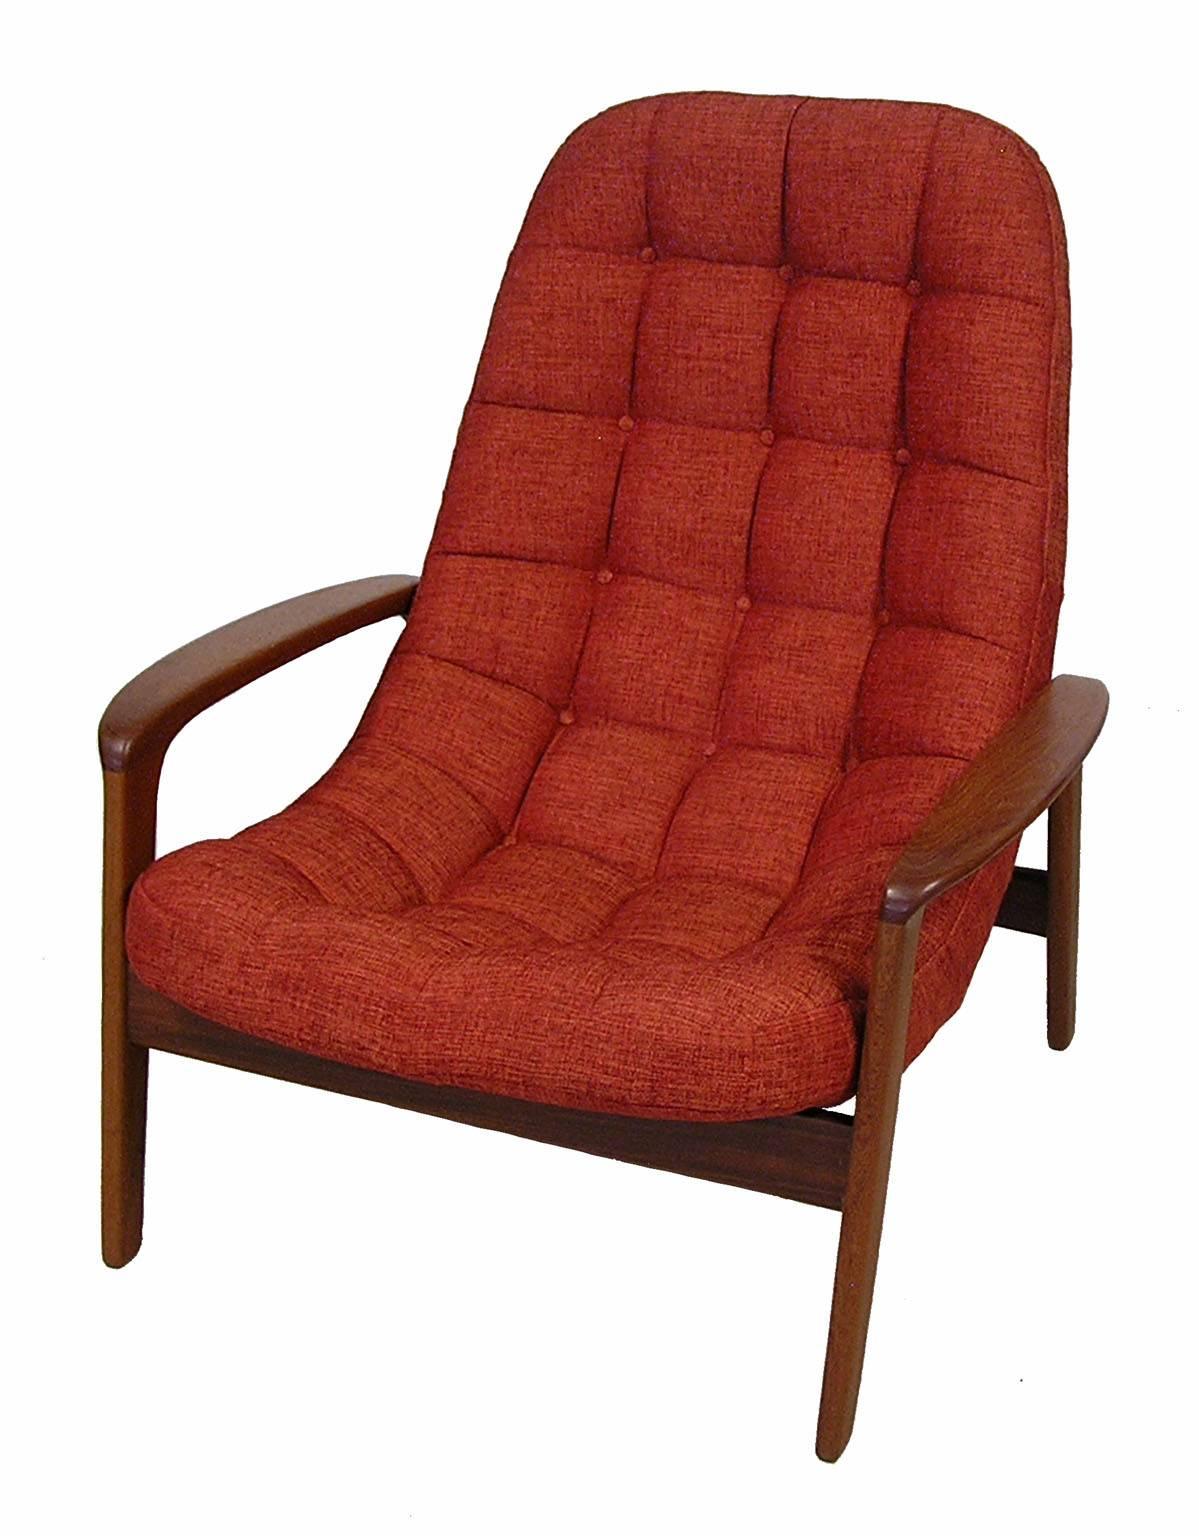 A classic lounge chair from the 1960s modern era designed and manufactured by R. Huber & Co. of Canada. Extremely comfortable with tons of Danish Mid-Century Modern character. Features a solid teak frame with sculpted armrests and low button